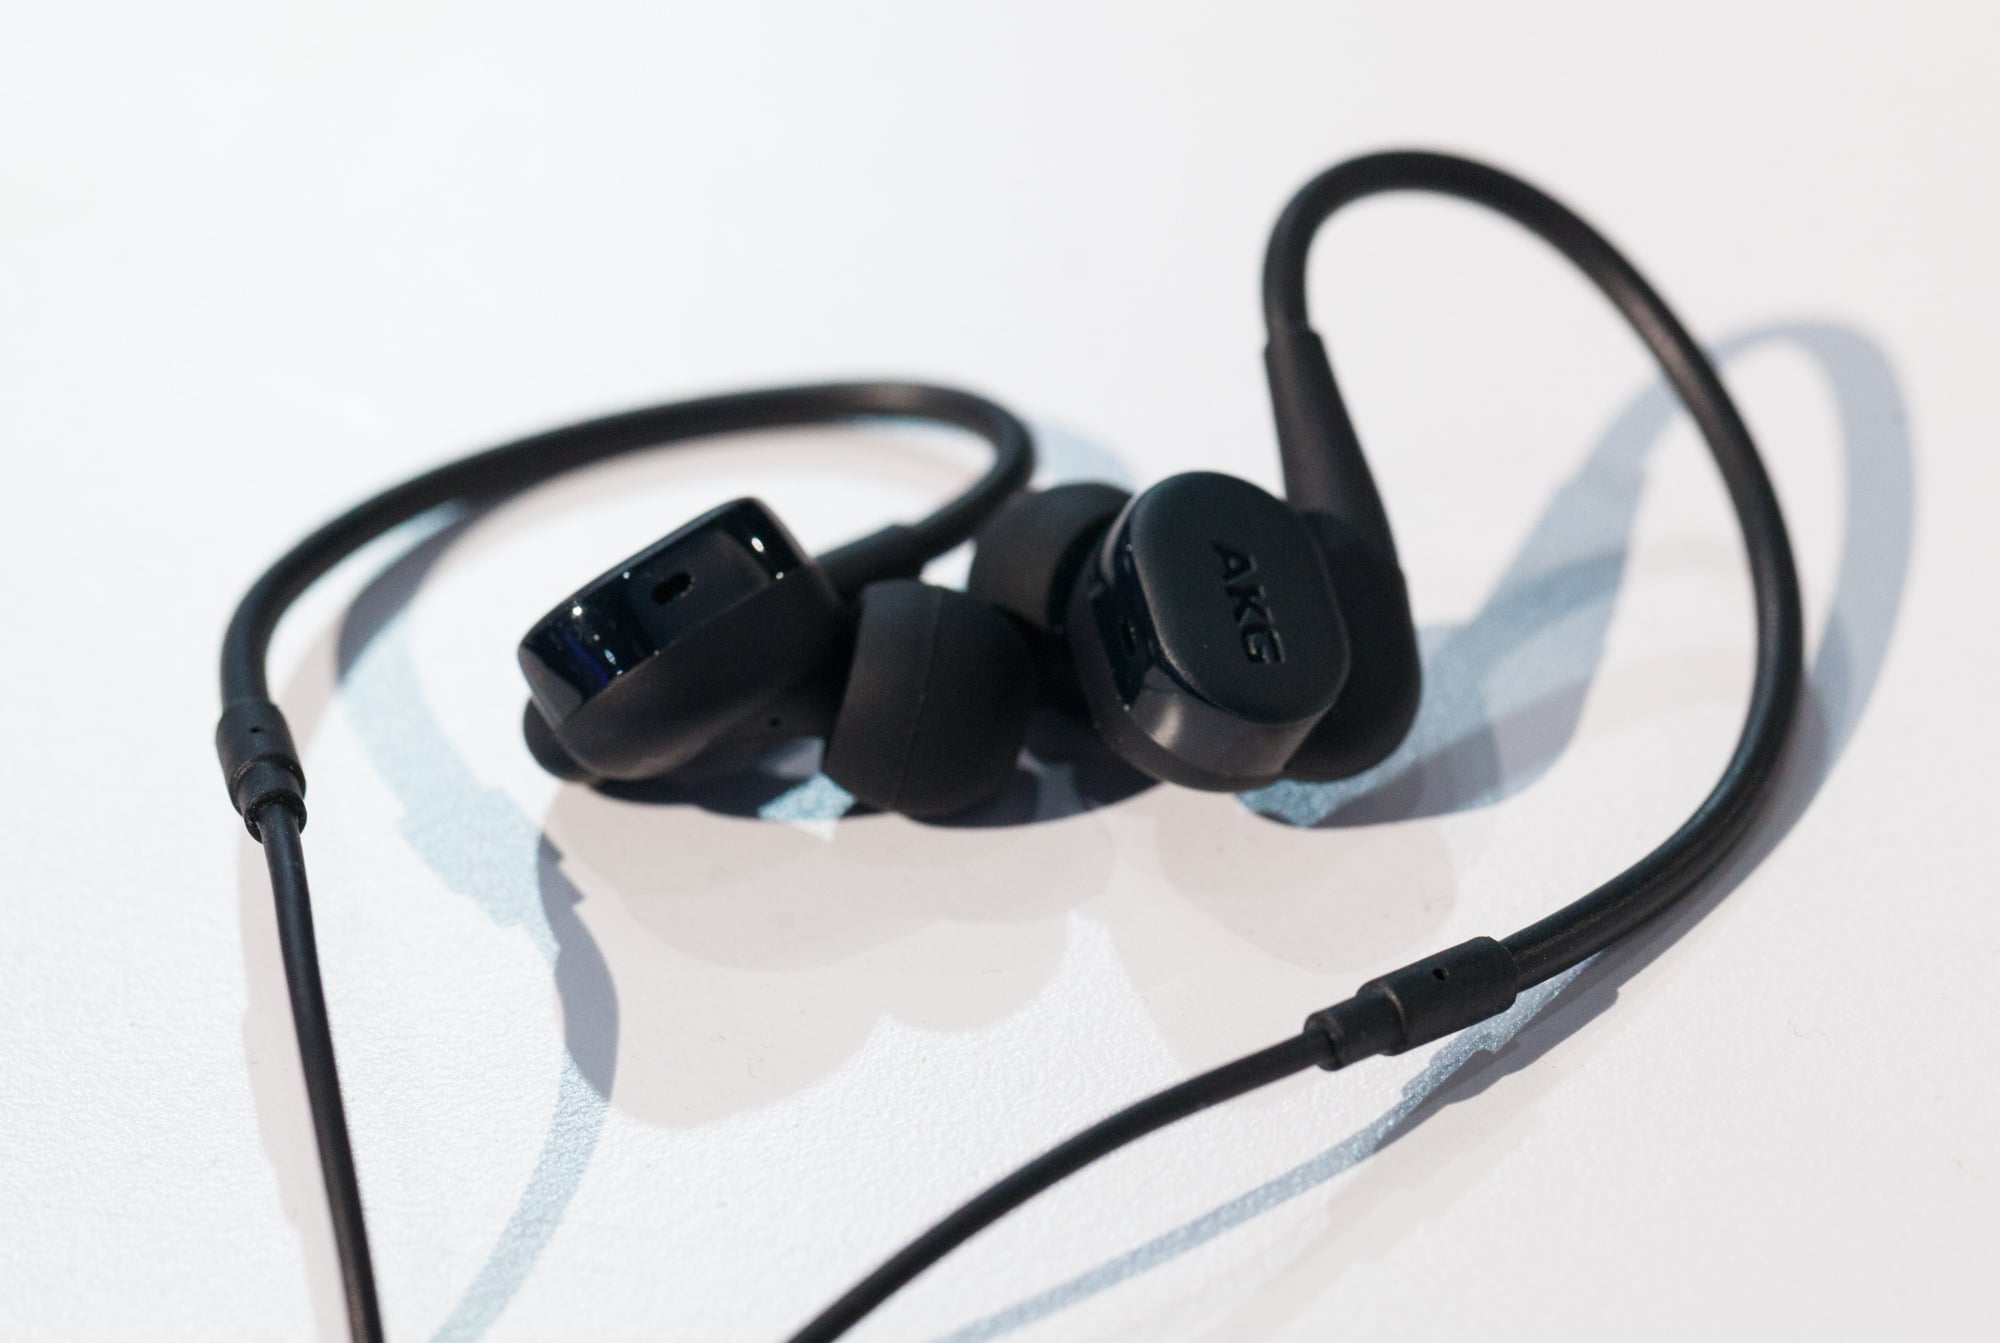 AKG's N-SERIES In-ear Headphones with High-Res Audio Options - The